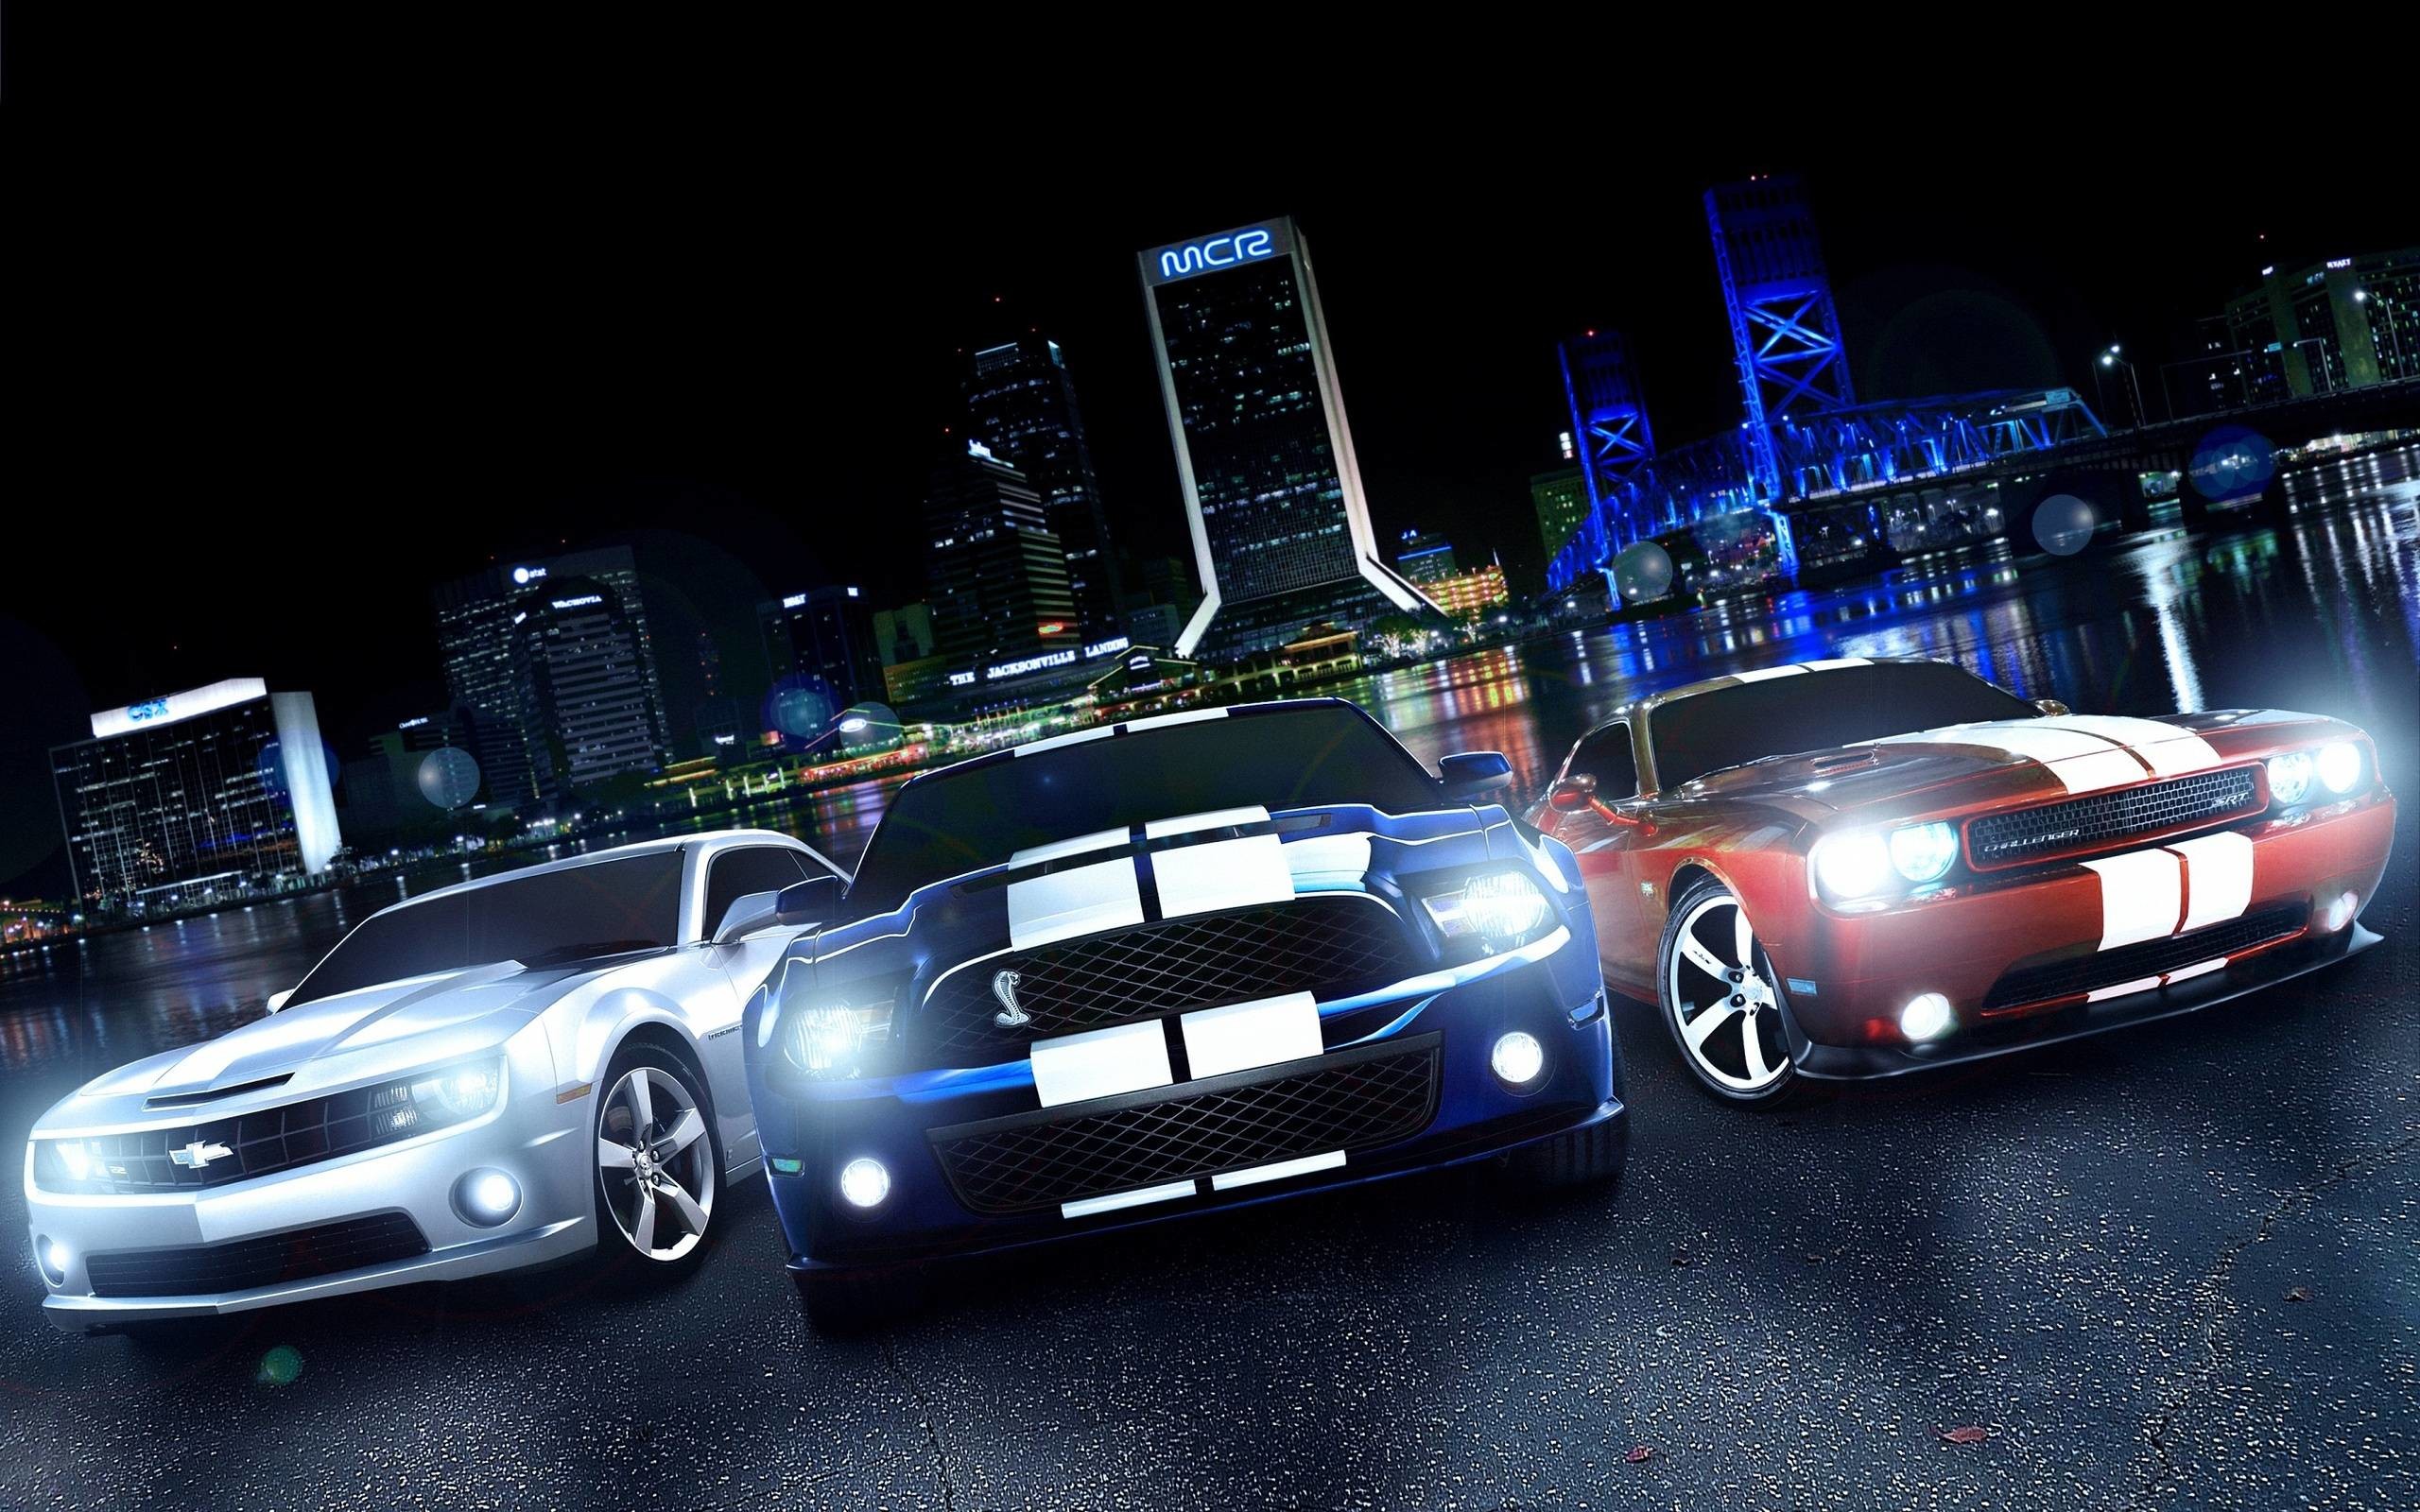 2560x1600 Shelby Mustang Wallpaper For Iphone #sBQ